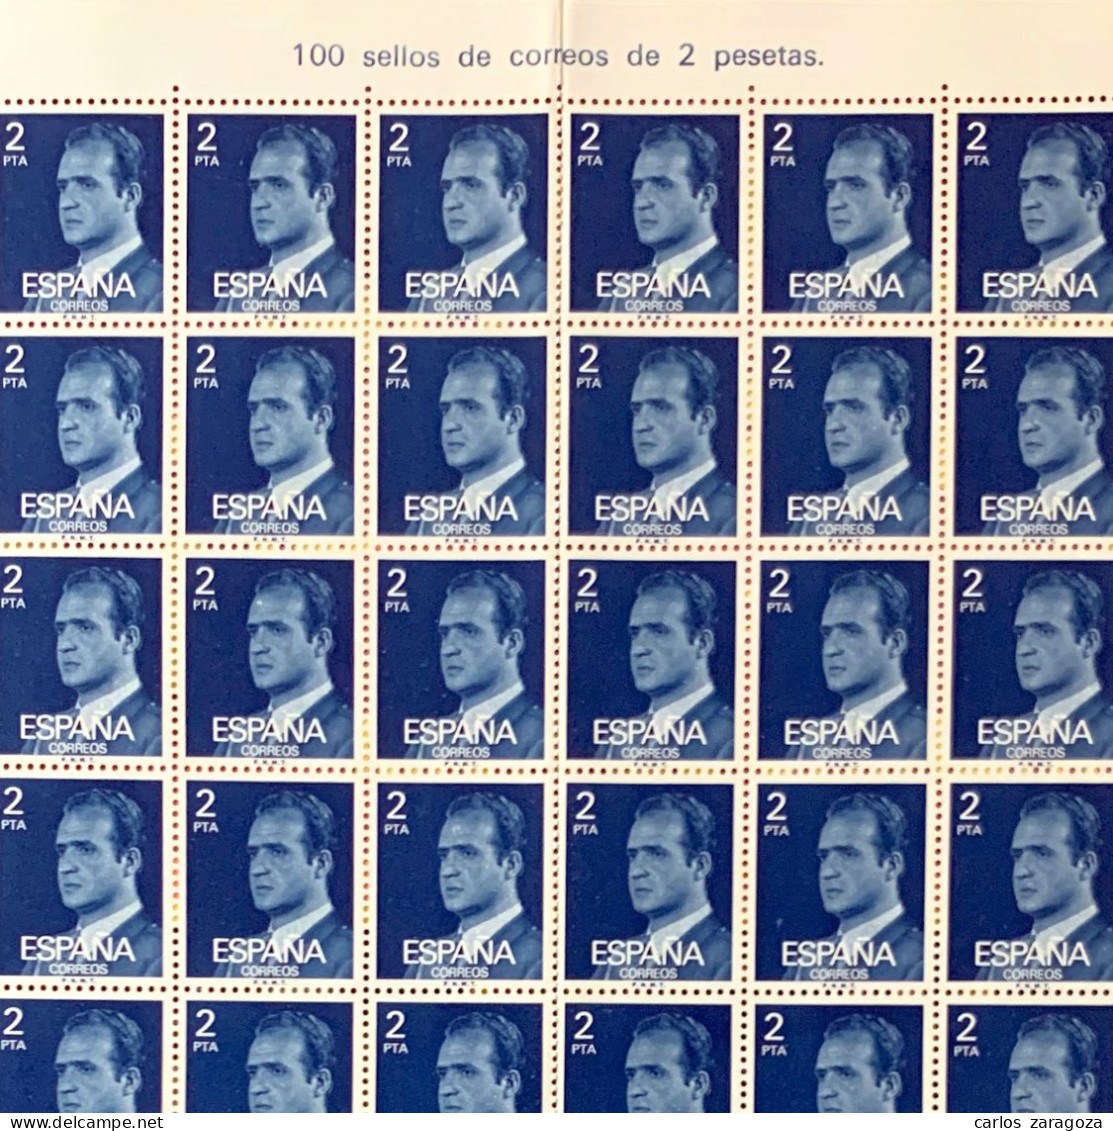 SPAIN 1976—KING JUAN CARLOS #1975—COMPLETE SHEET 100 MNH STAMPS—DEFINITIVE ISSUE—ESPAGNE Feuille Yt 1991 Timbres Neufs - Hojas Completas